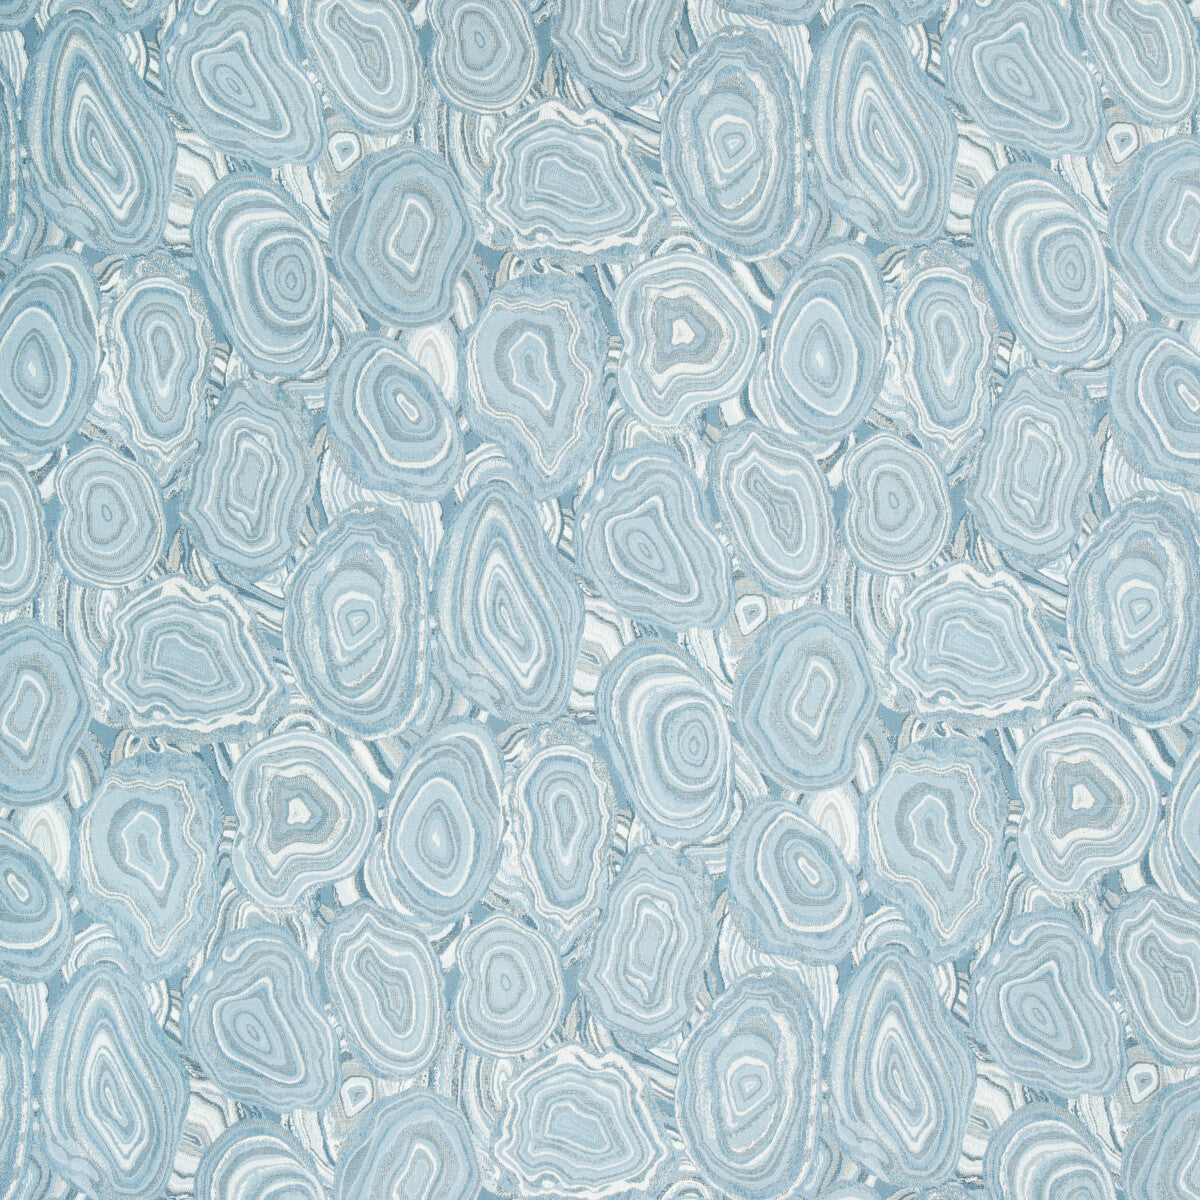 Kravet Design fabric in 34707-5 color - pattern 34707.5.0 - by Kravet Design in the Crypton Home collection